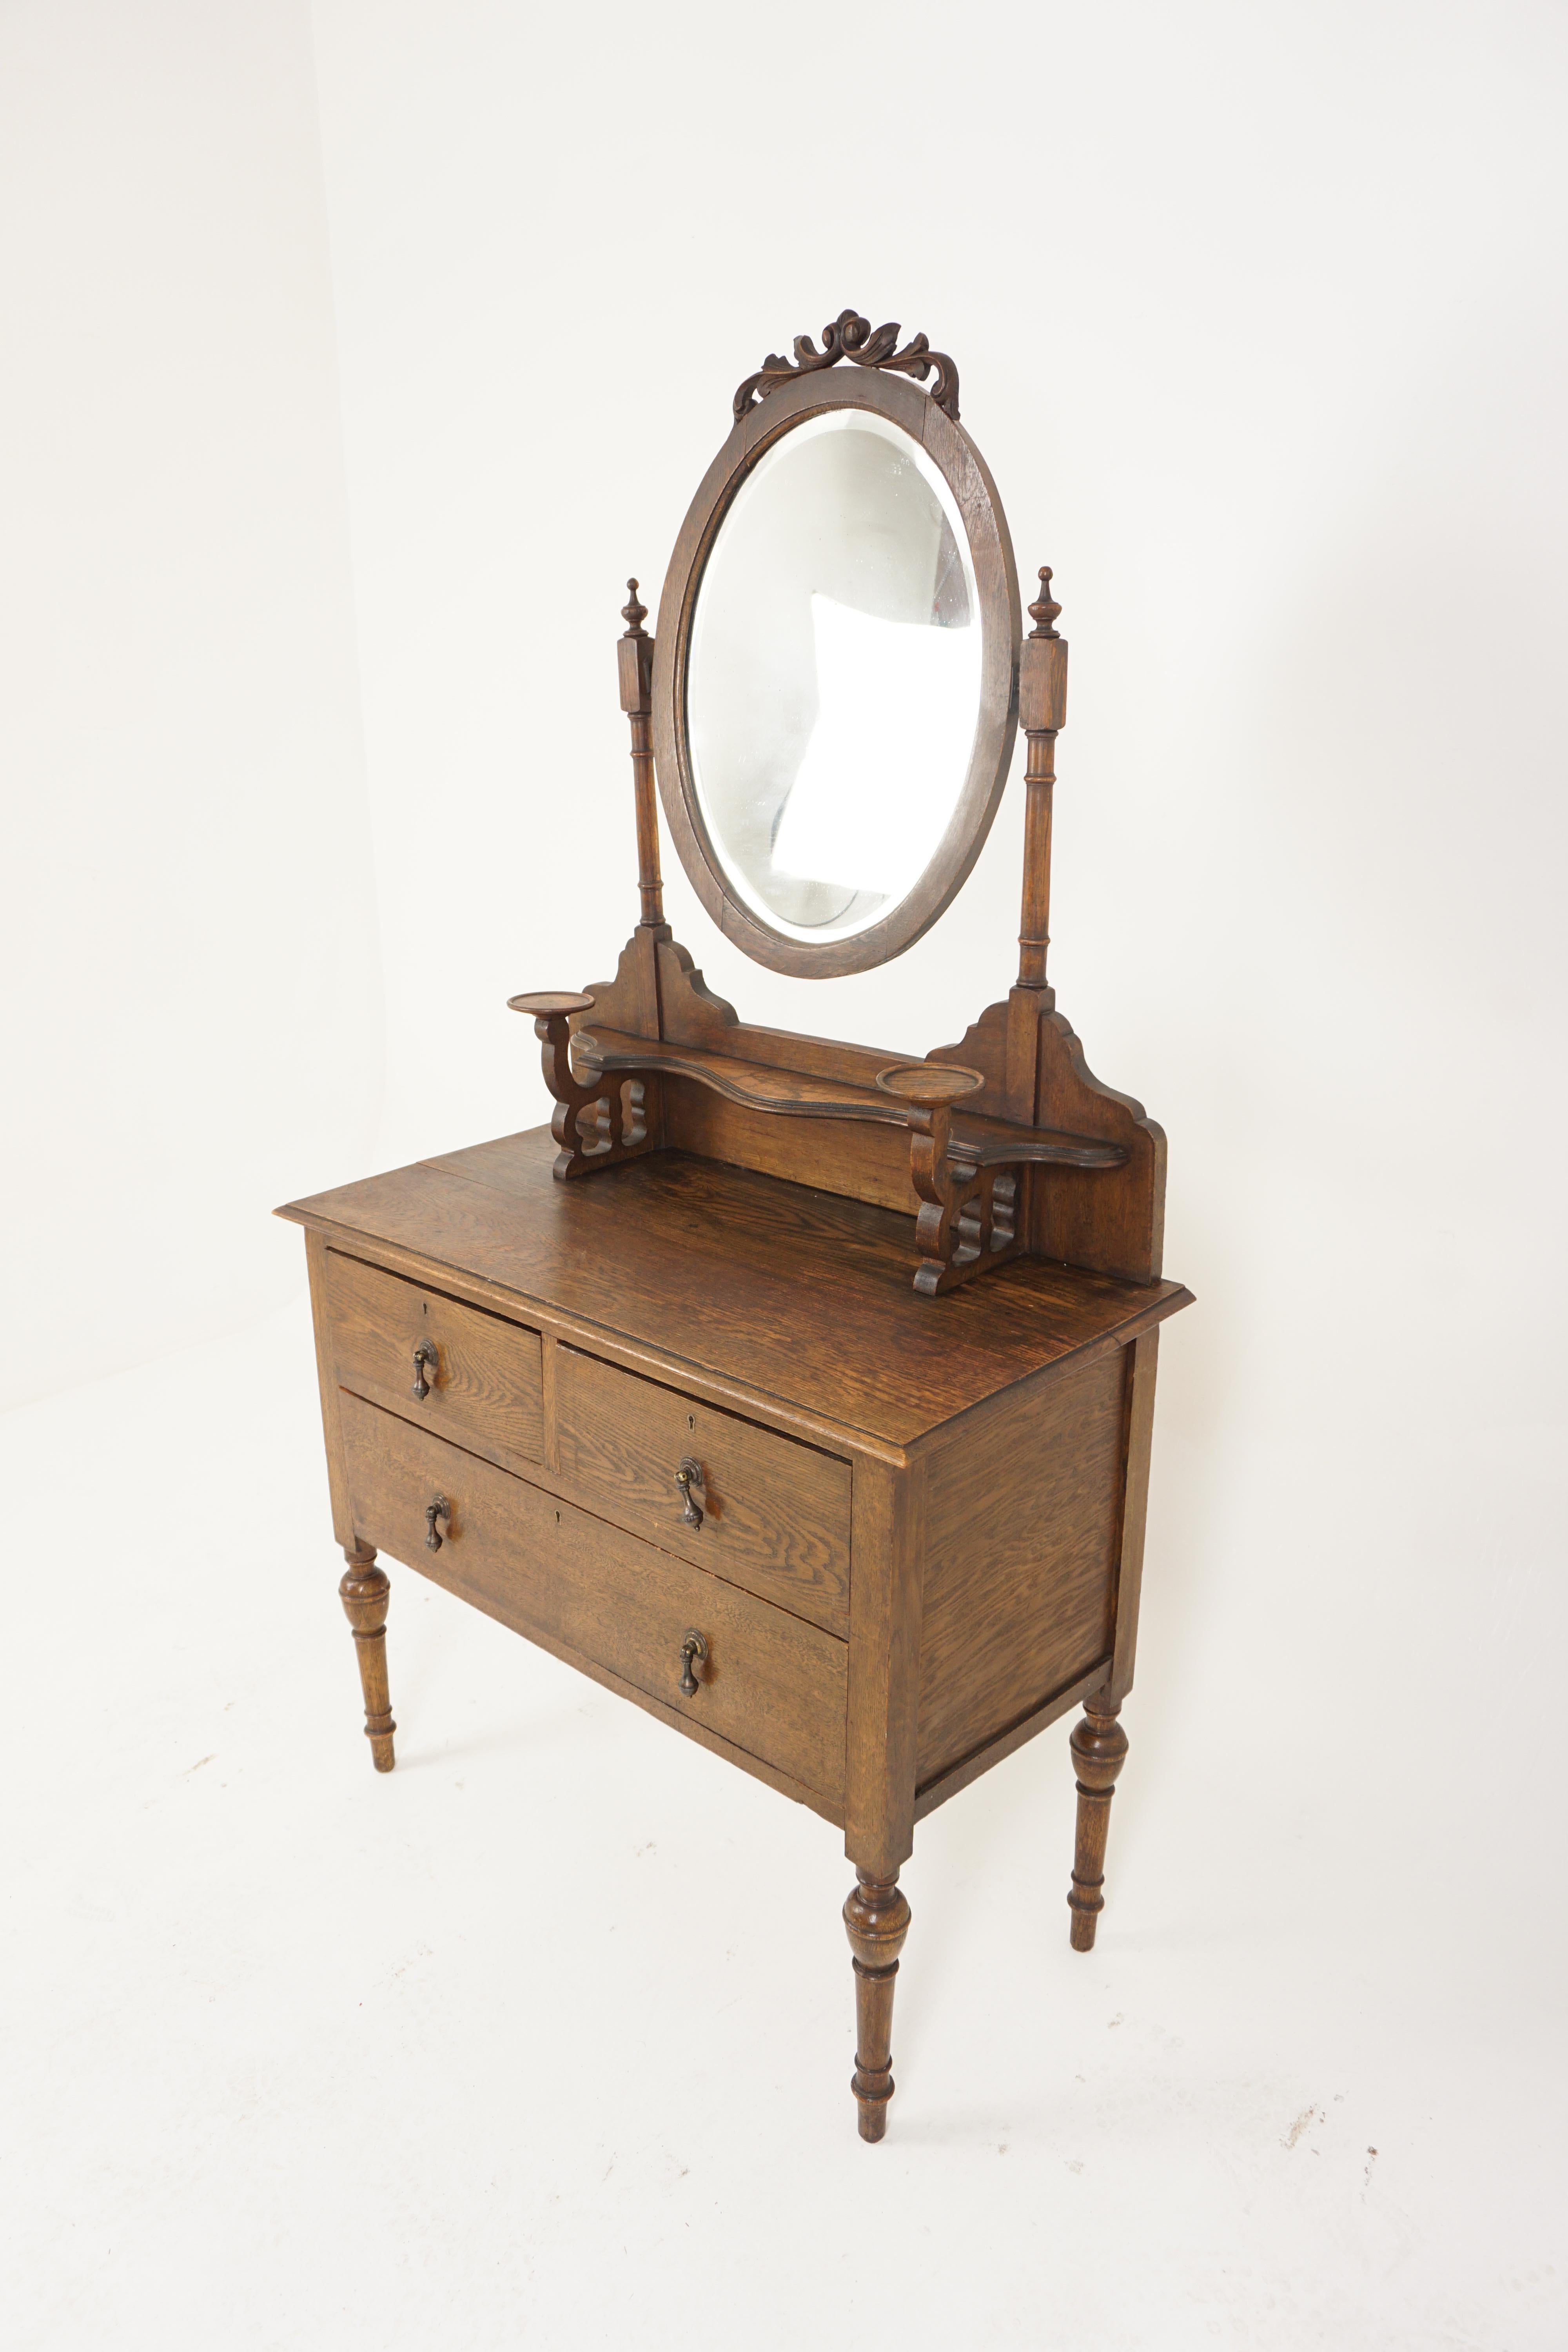 Arts and Crafts oak vanity, dressing chest, chest of drawers, Scotland 1910, H888

Scotland 1910
Solid Oak,
Original Finish
Ornate carving to the top of the oval bevelled mirror
Flanked by a pair of turned supports
Shaped shelf